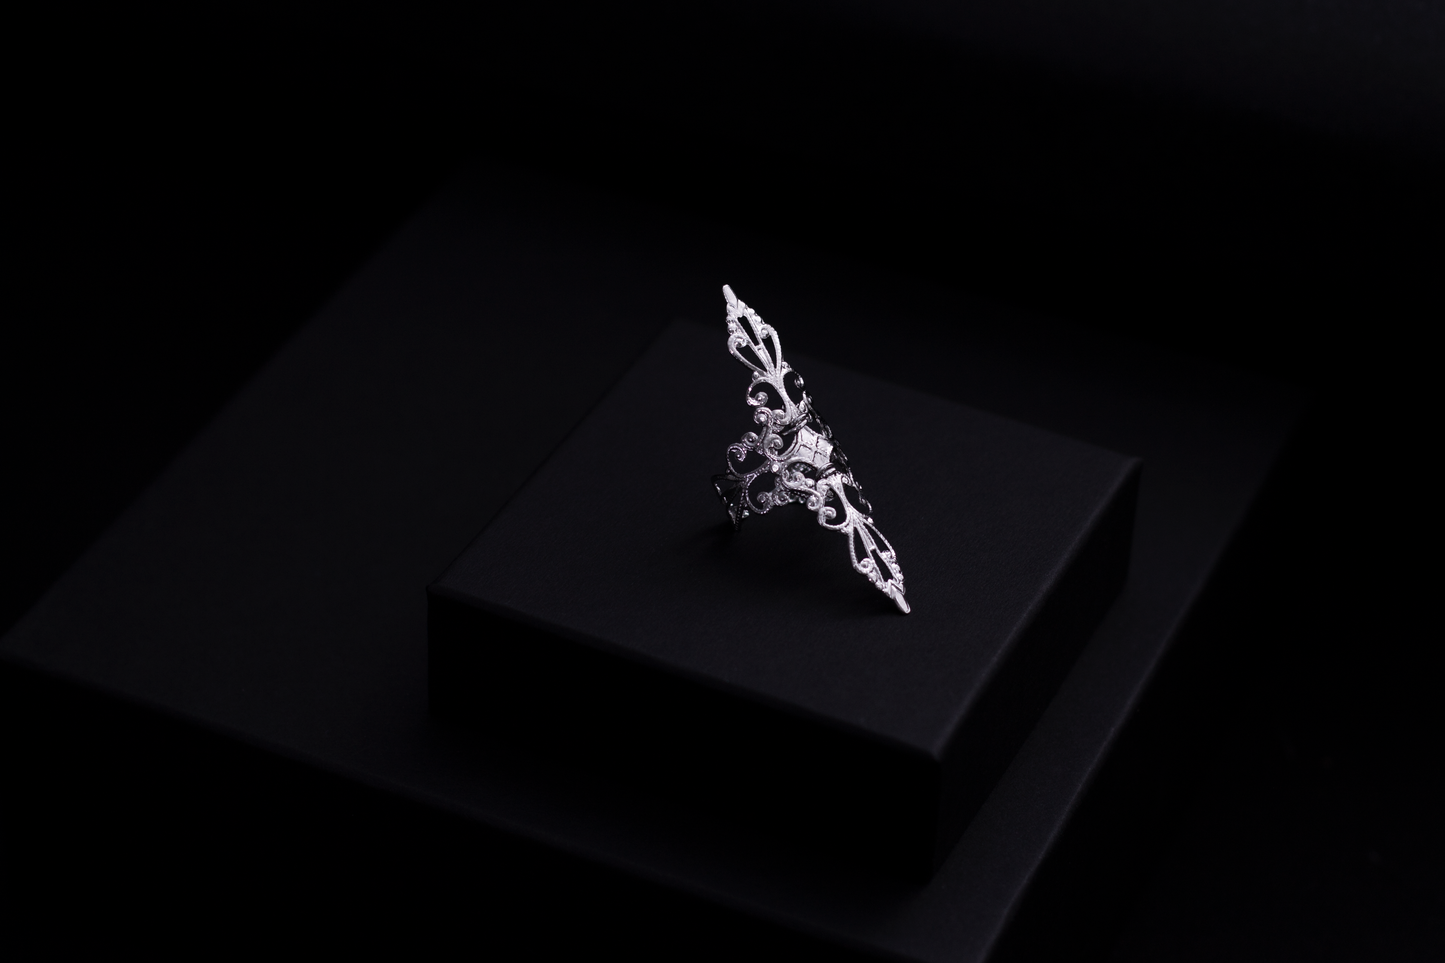 A sleek Myril Jewels' ring on a dark surface, revealing a sophisticated silver filigree expressing the brand's refined gothic jewelry collection.